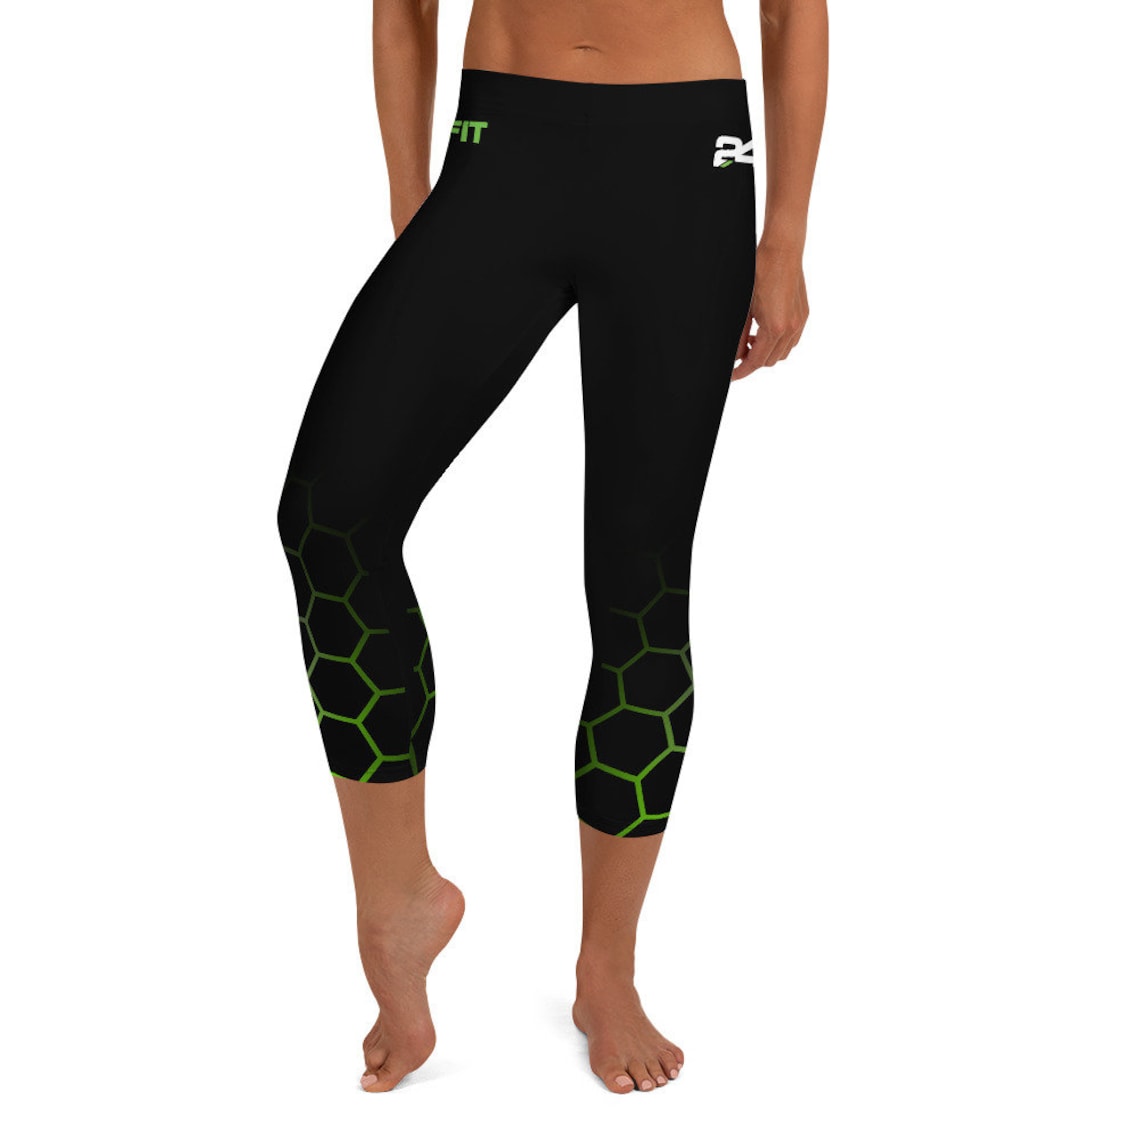 Harley Davidson Leggings And Tank Top Set  International Society of  Precision Agriculture